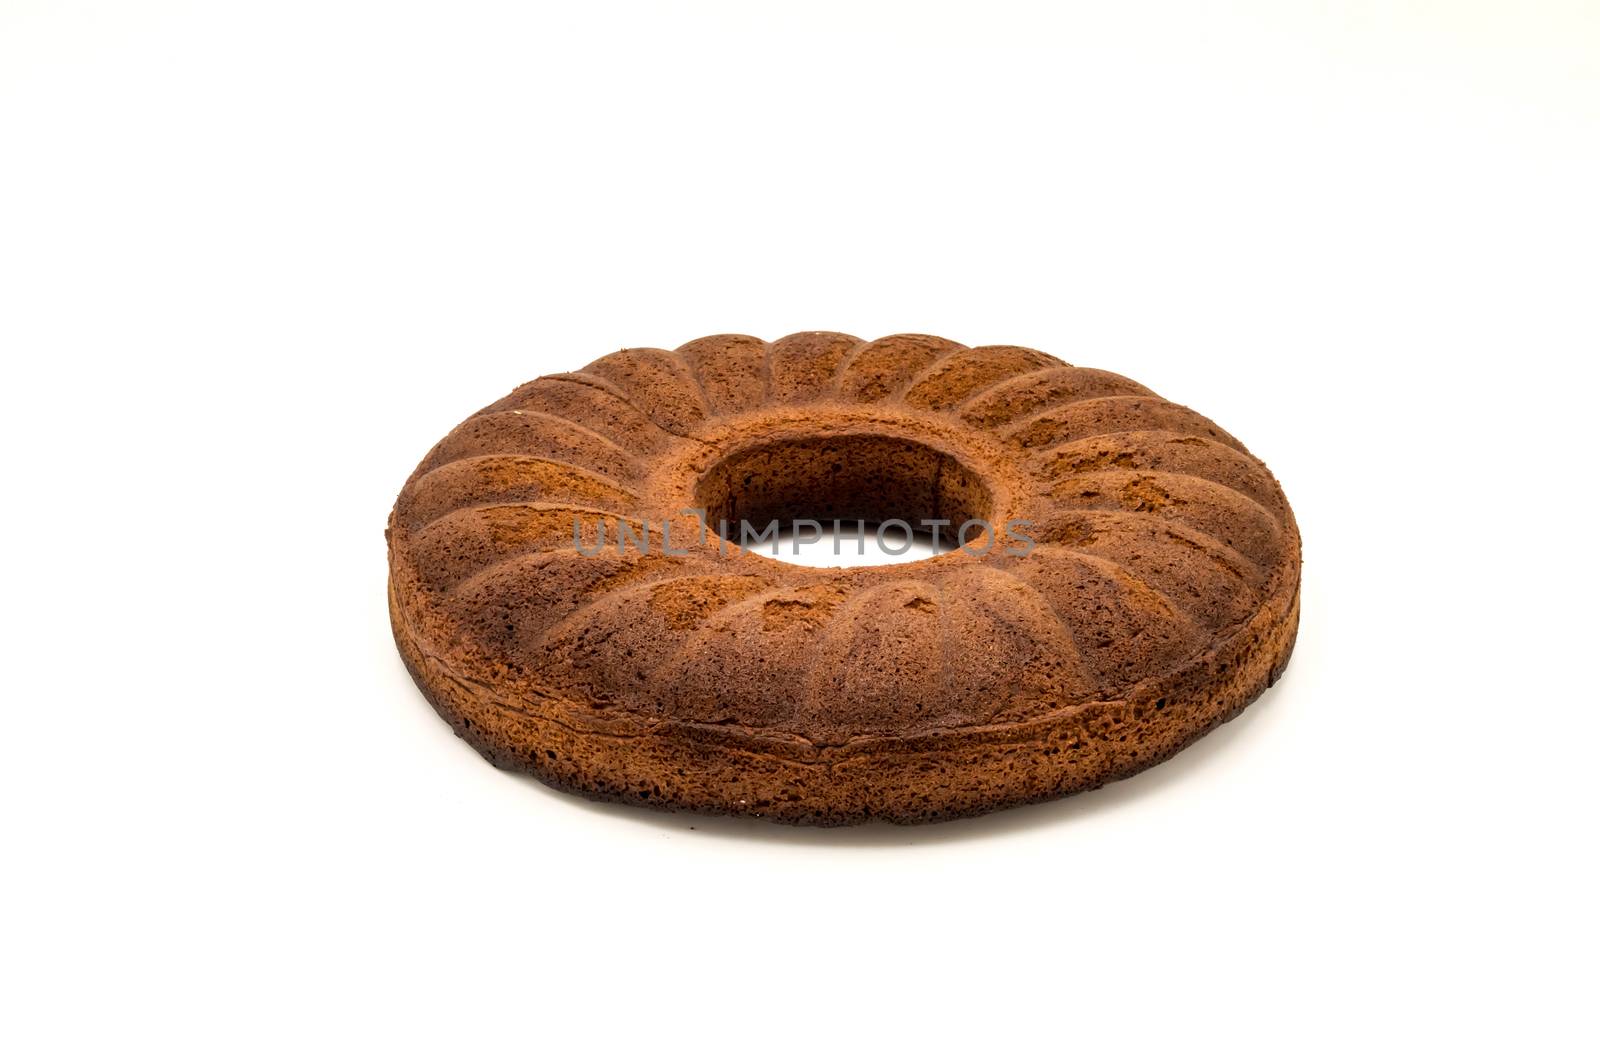 Circular marbled cake laying on a white background